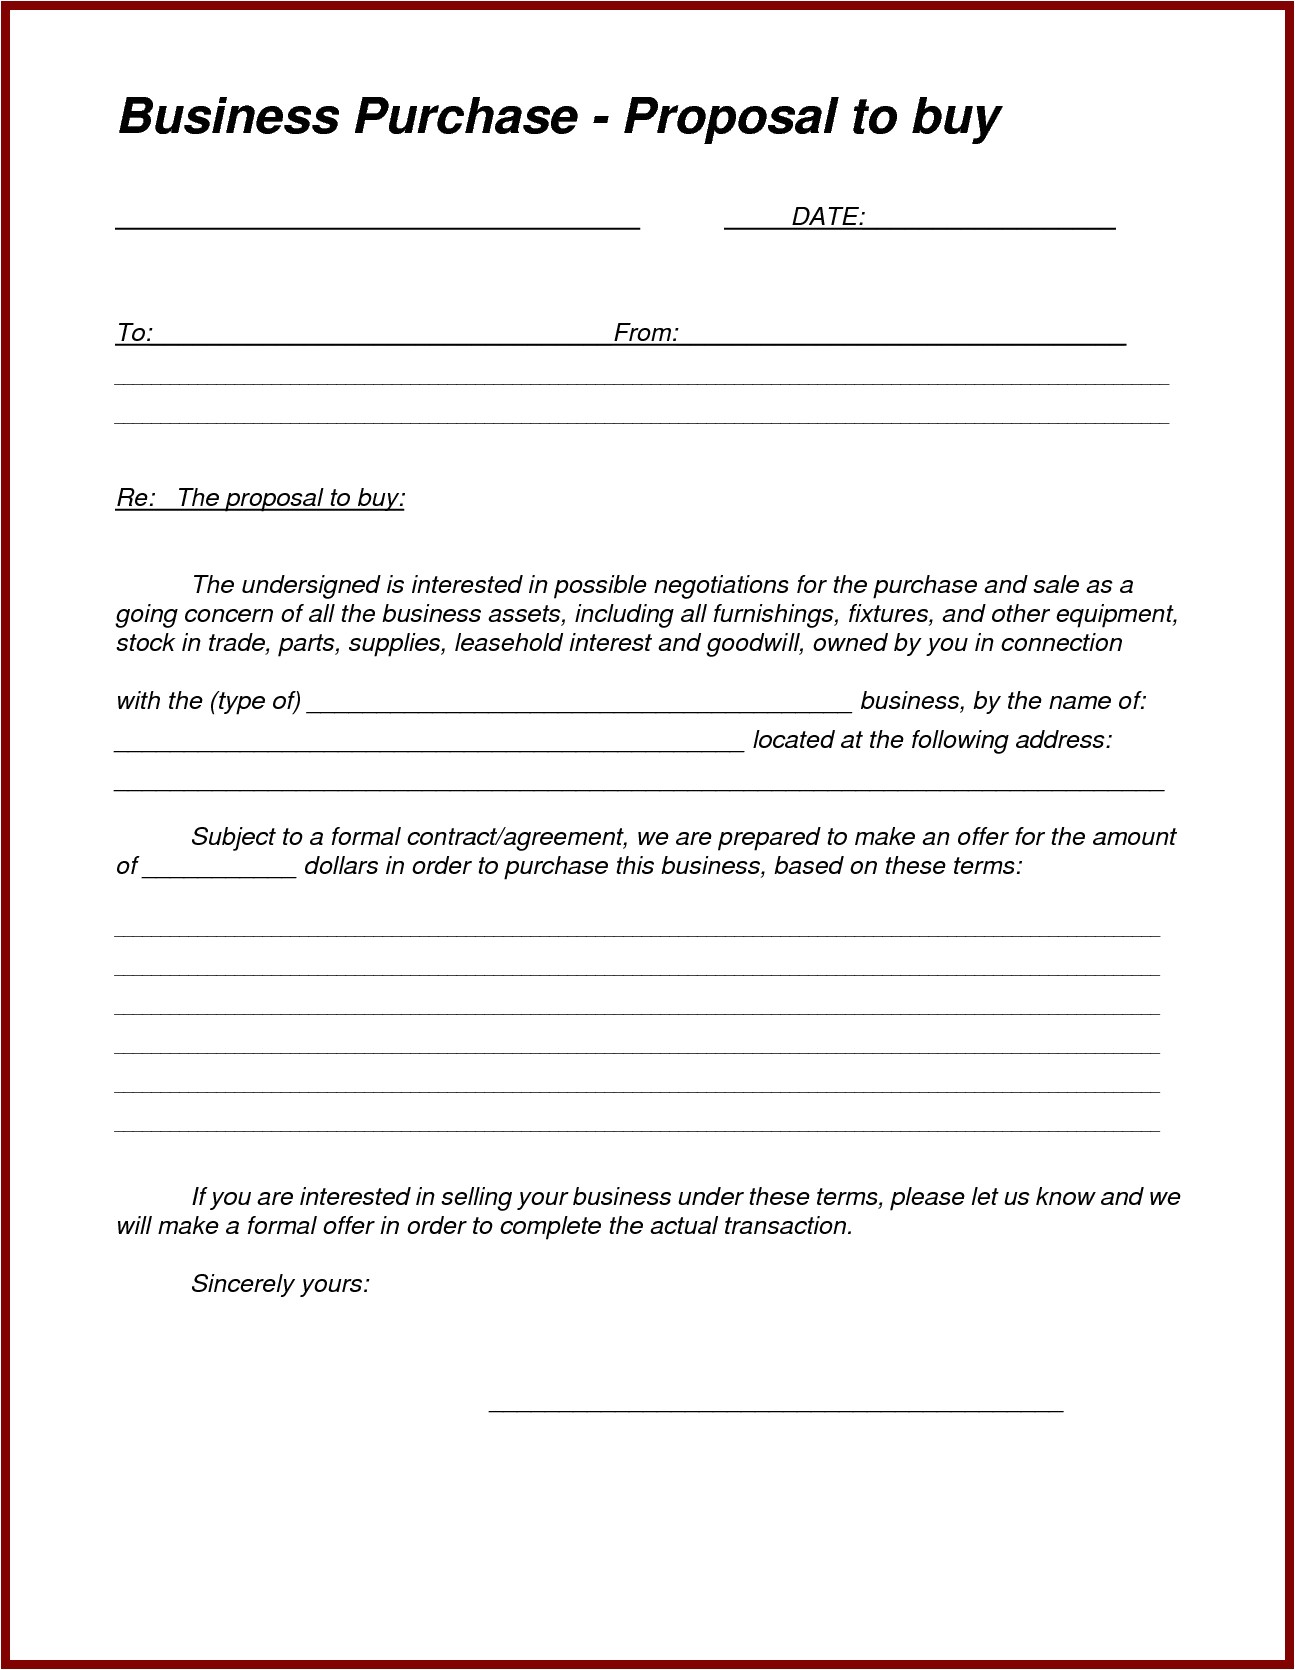 purchase proposal template